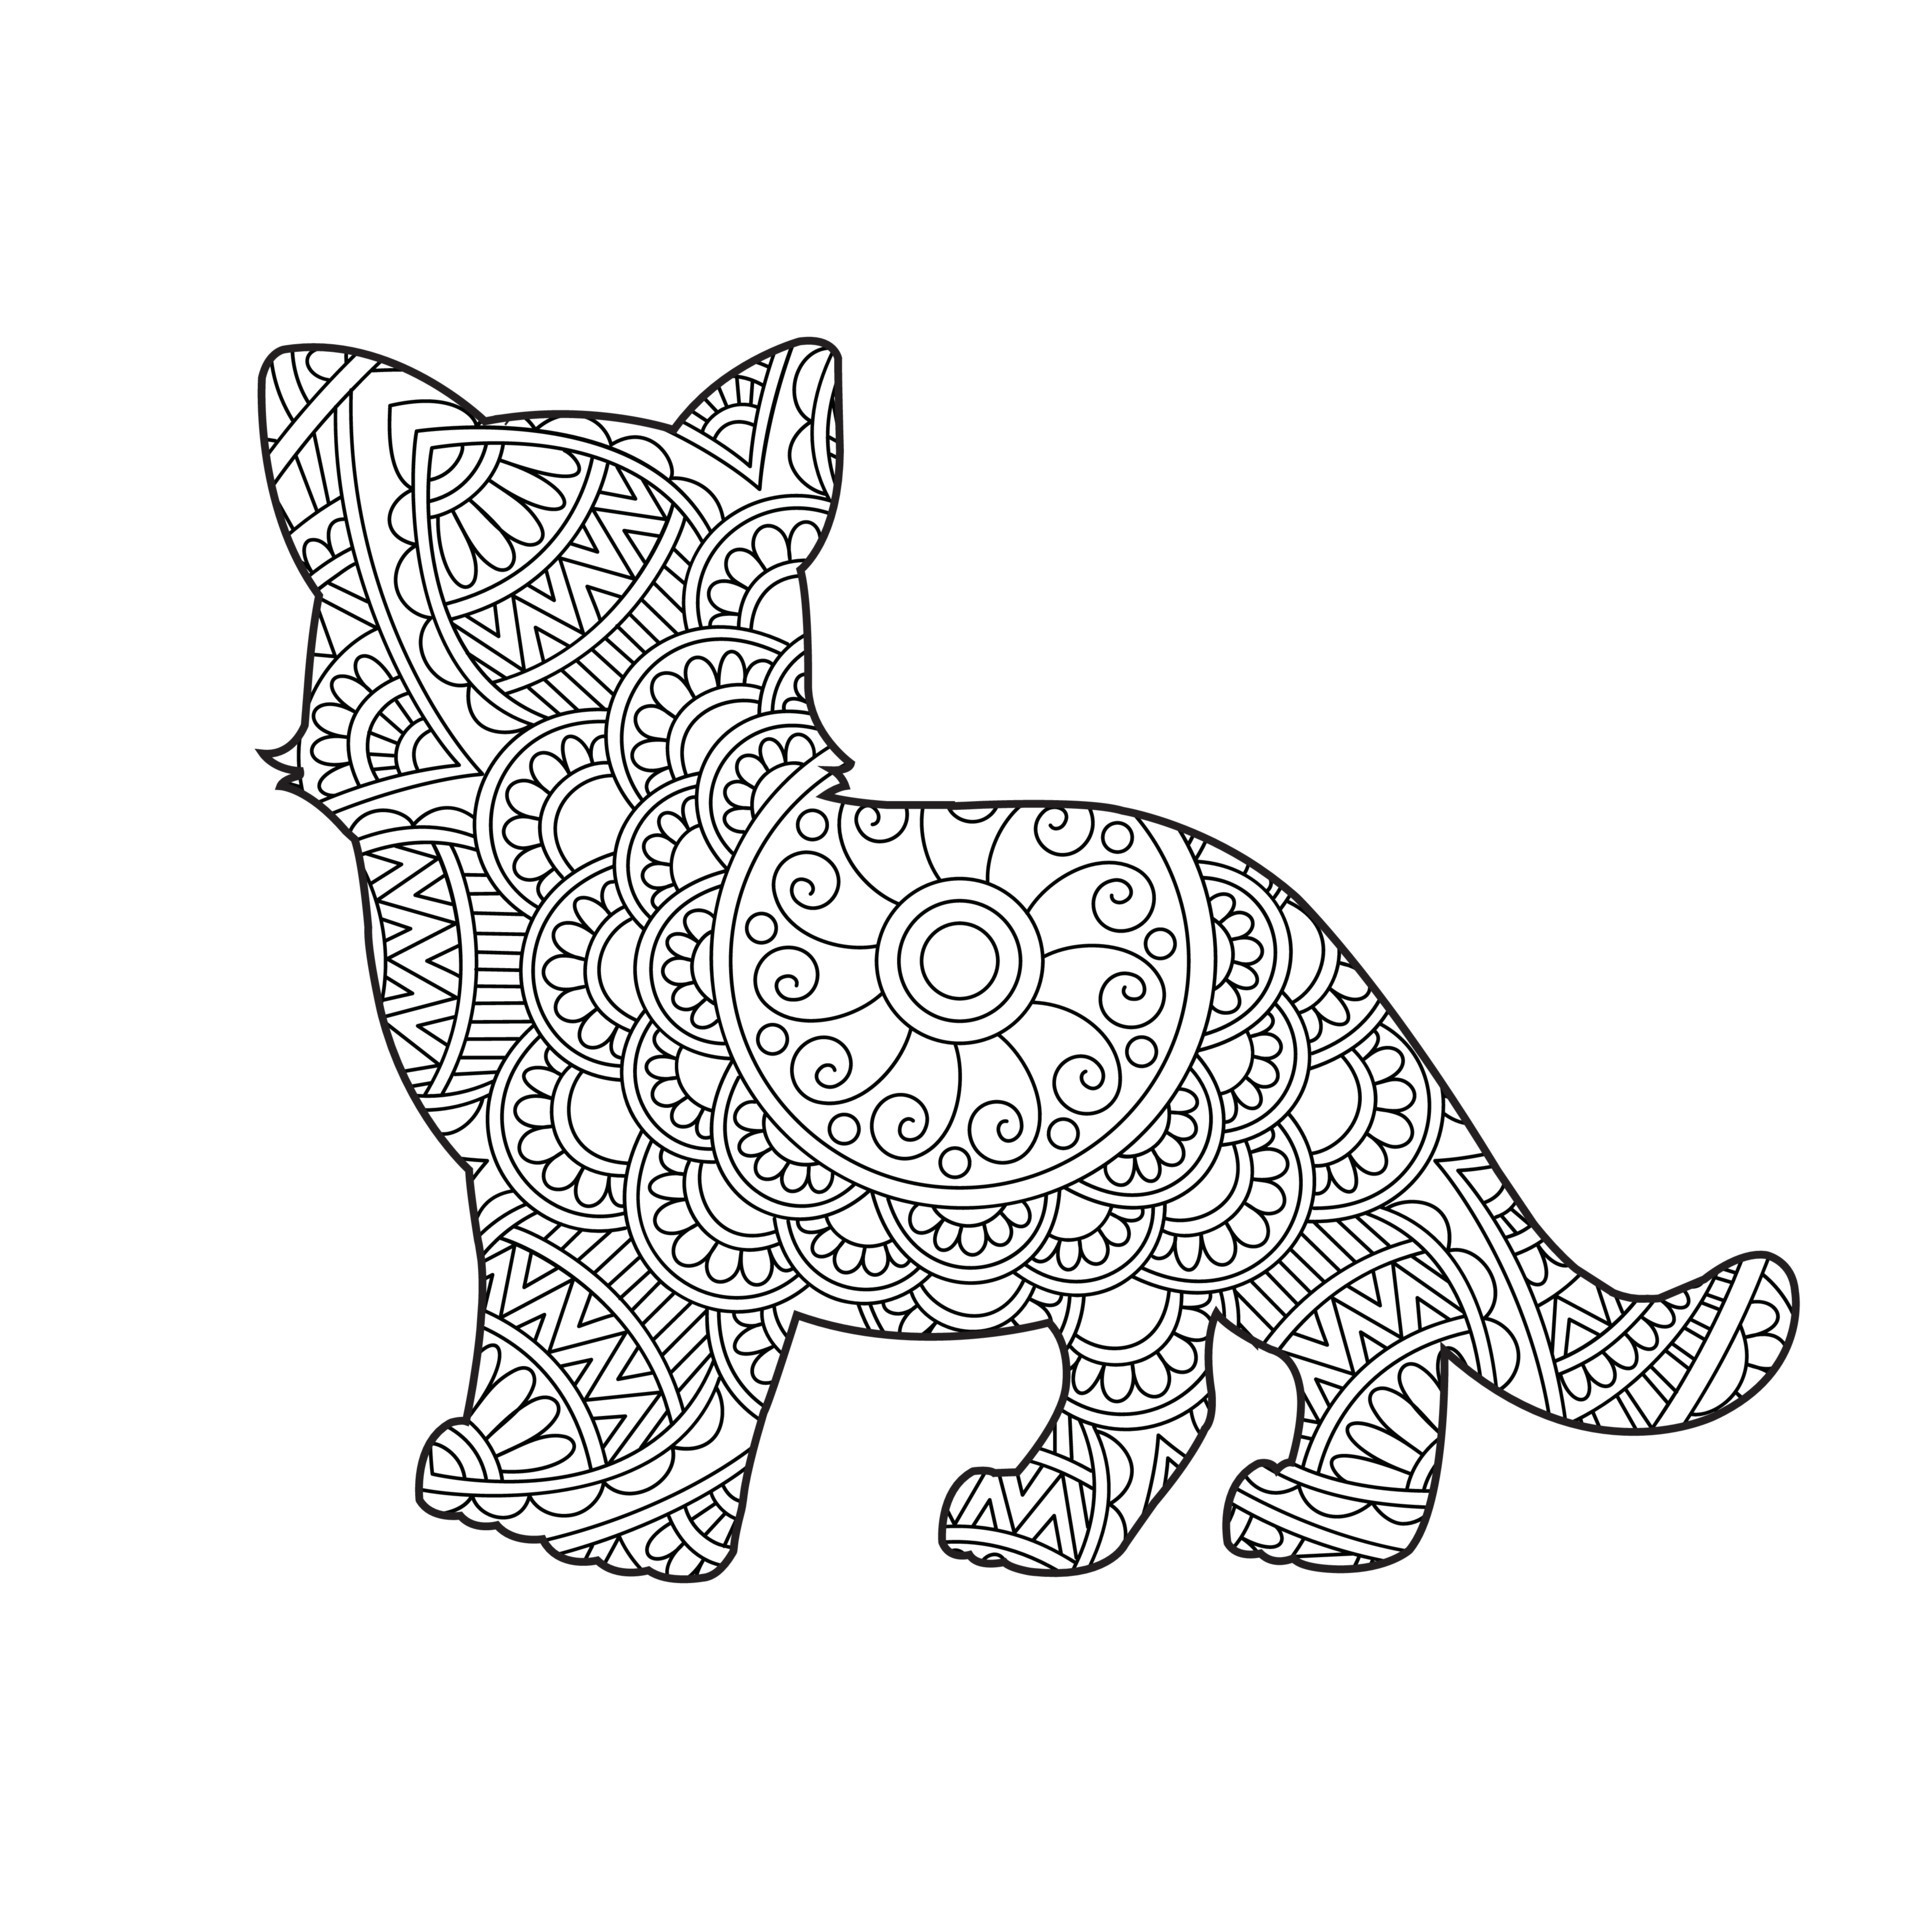 Cat Mandala Coloring Page for Adults Floral Animal Coloring Book Isolated  on White Background Antistress Coloring Page Vector Illustration 14916125  Vector Art at Vecteezy